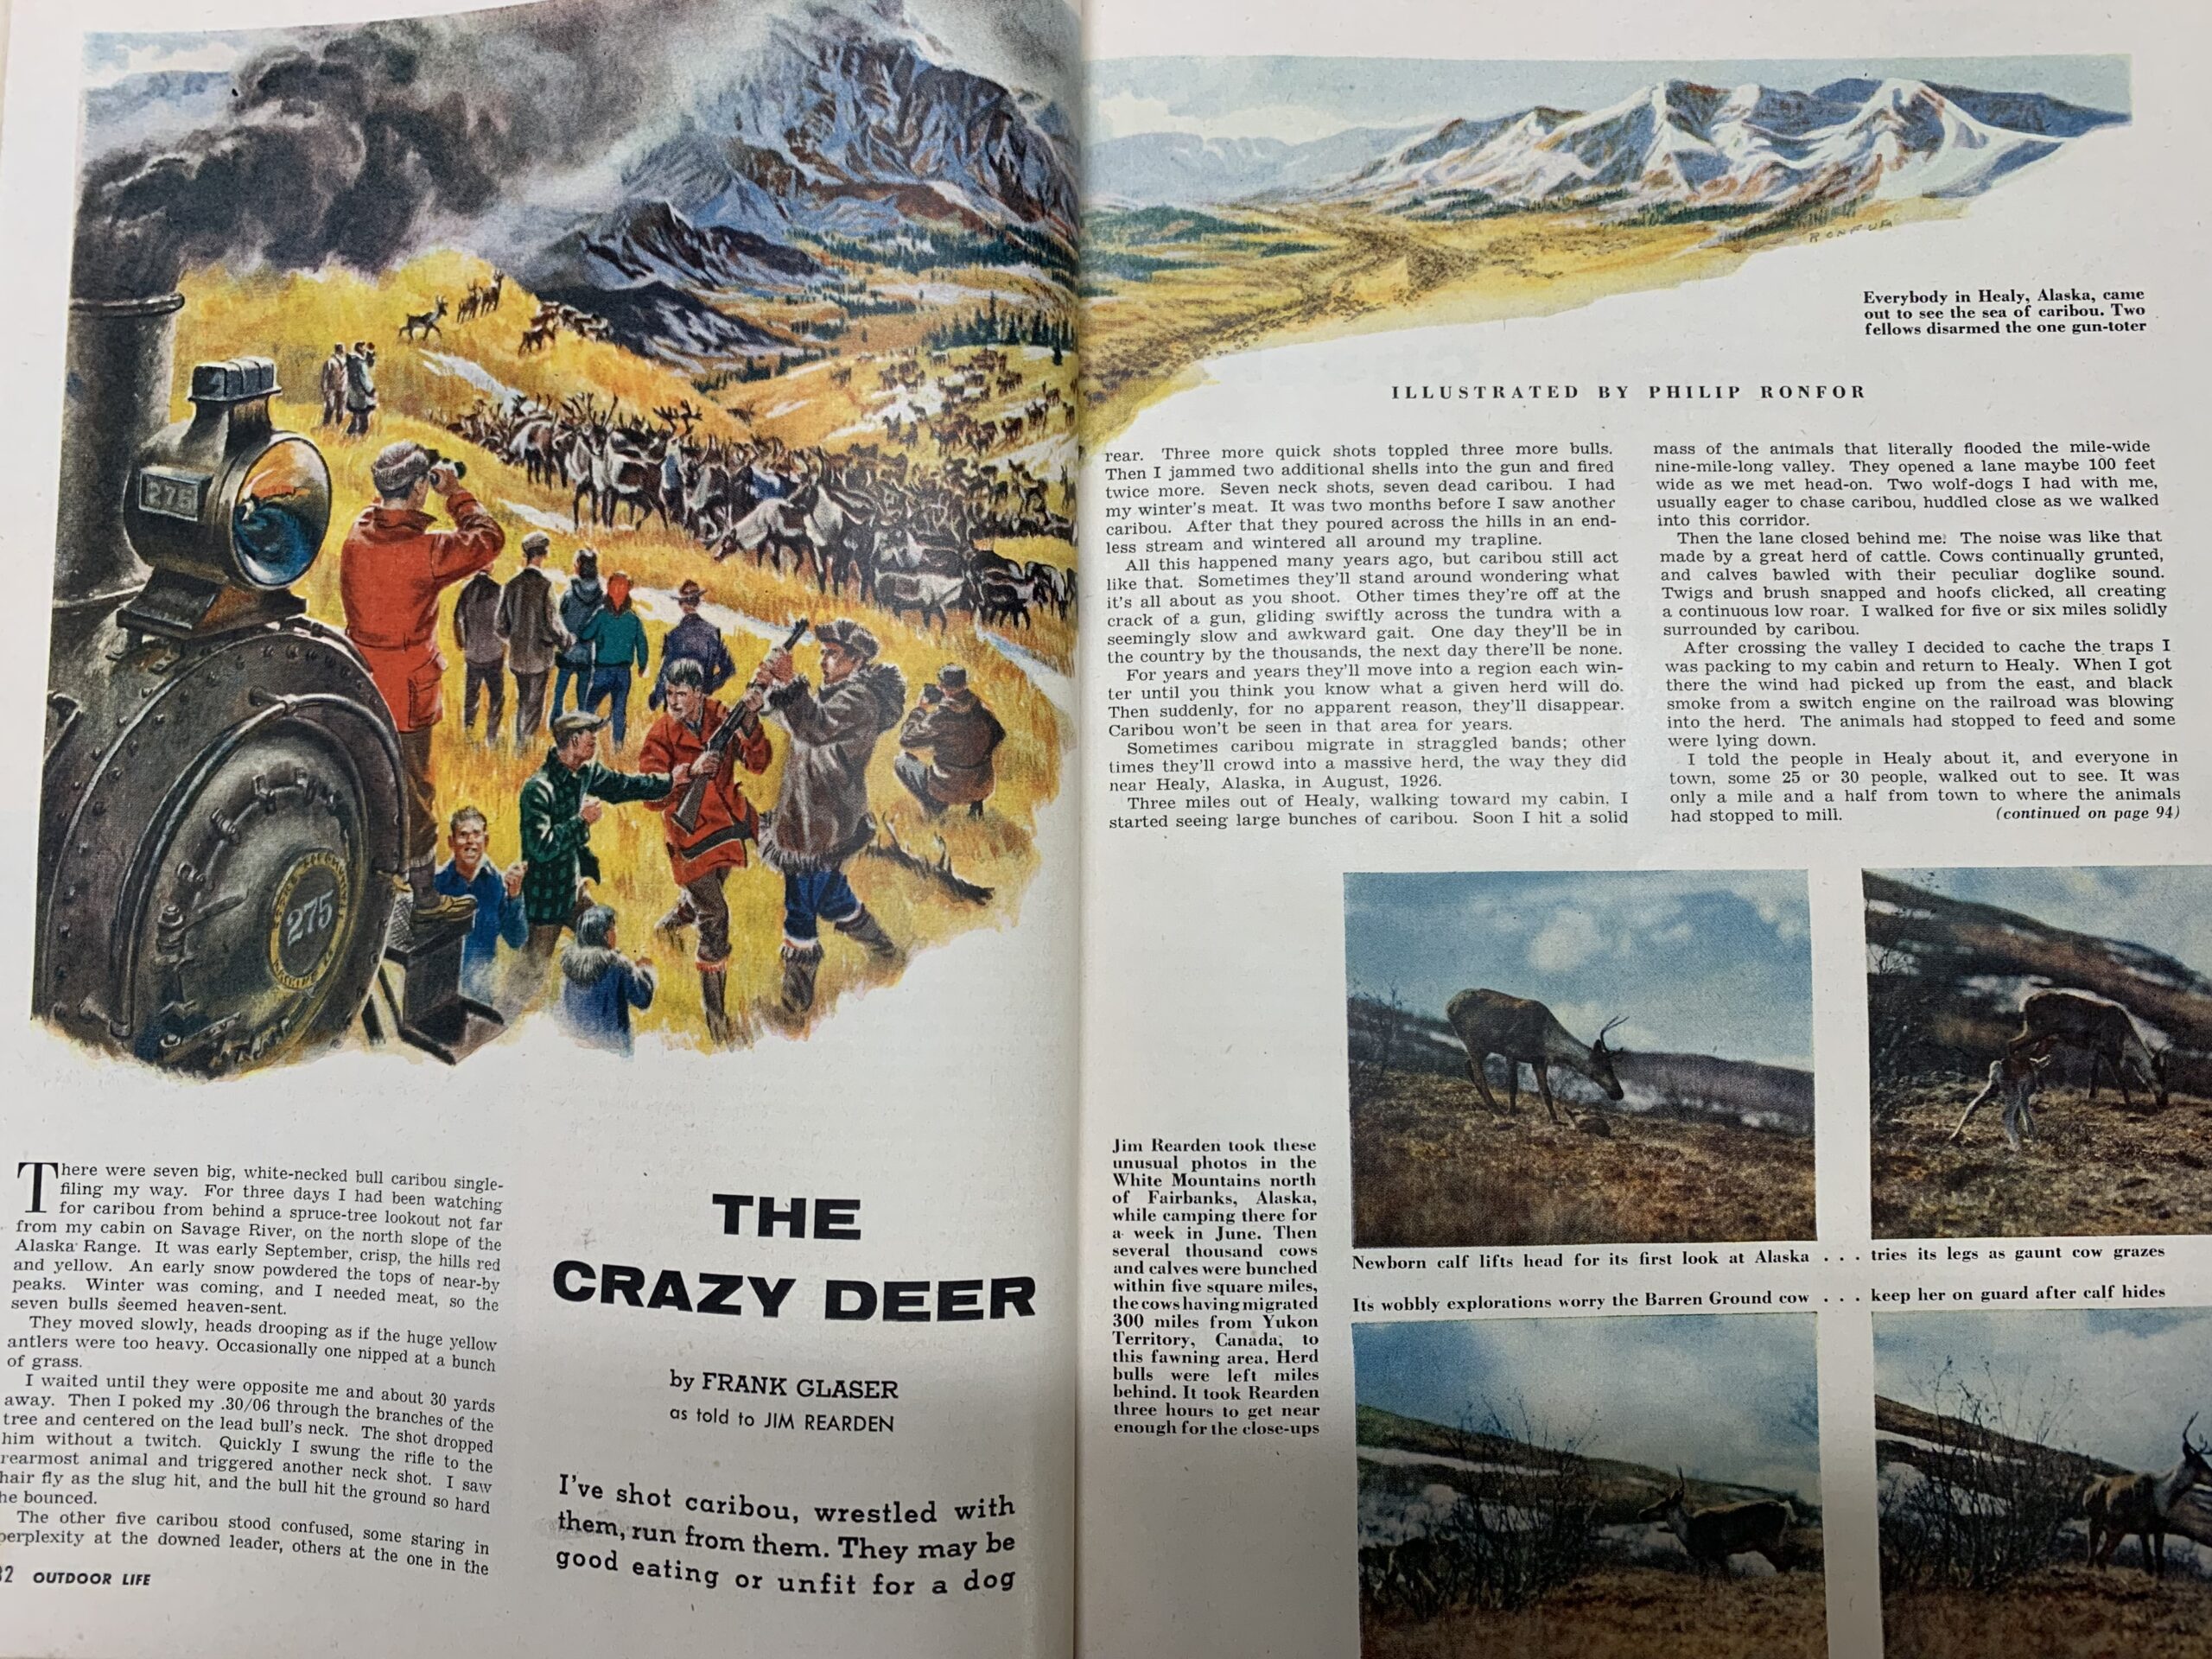 The Crazy Deer: A Frank Glaser Caribou Story, From the Archives